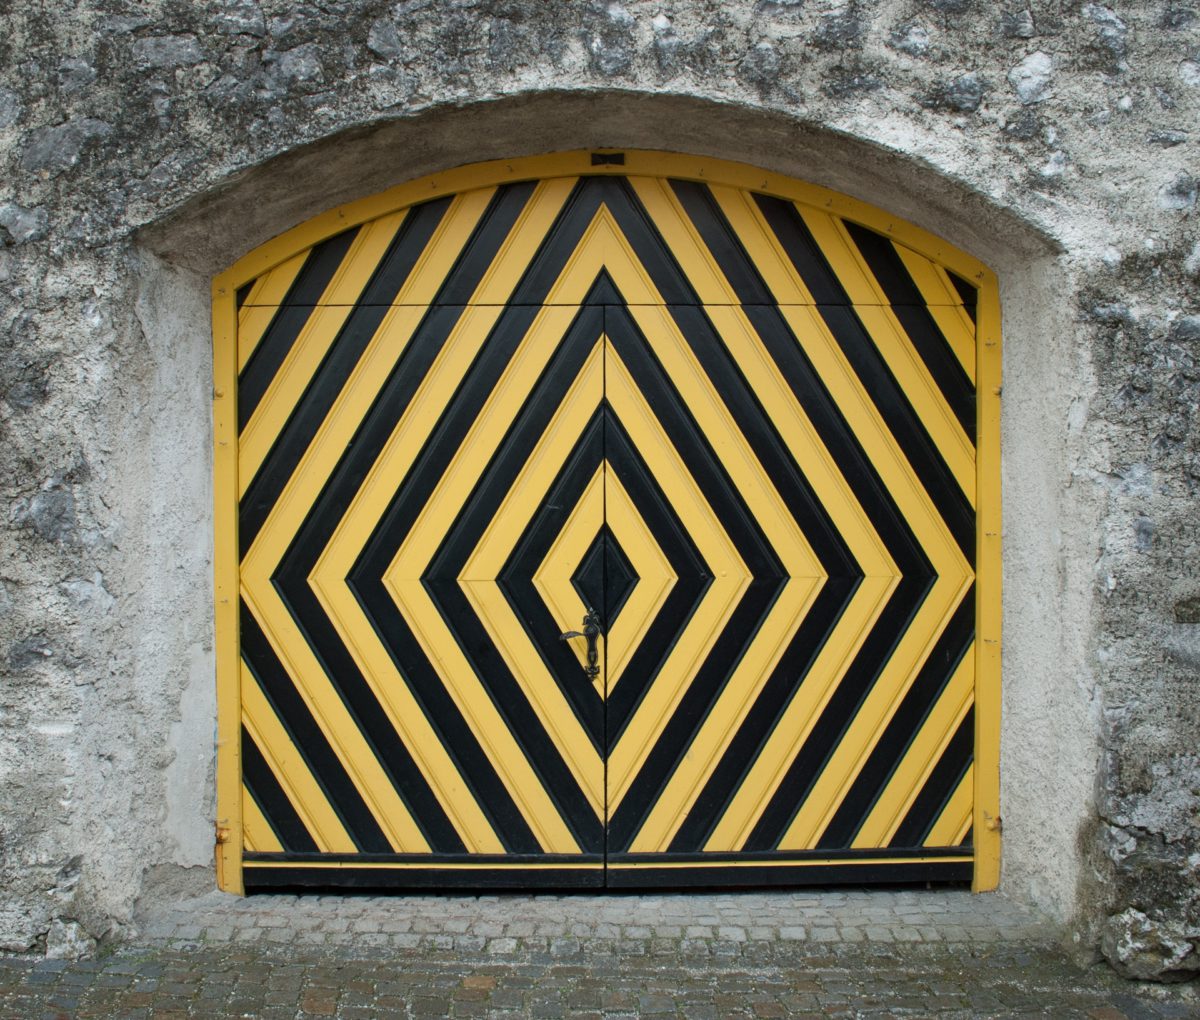 Representative photo of a door painted with the black and yellow "safety" stripes